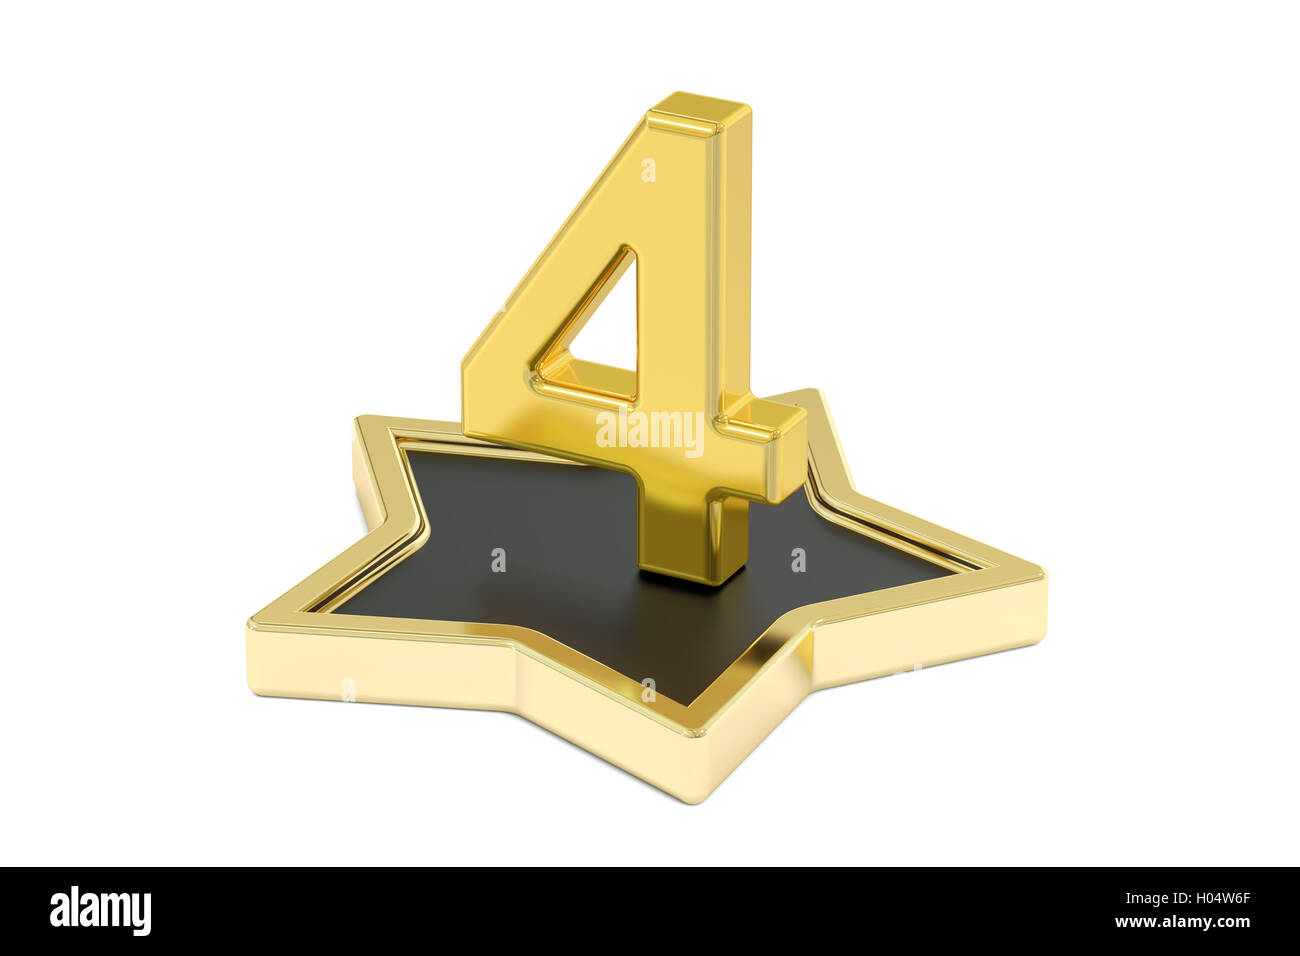 3D golden number 4 on star podium, 3D rendering isolated on white background Stock Photo